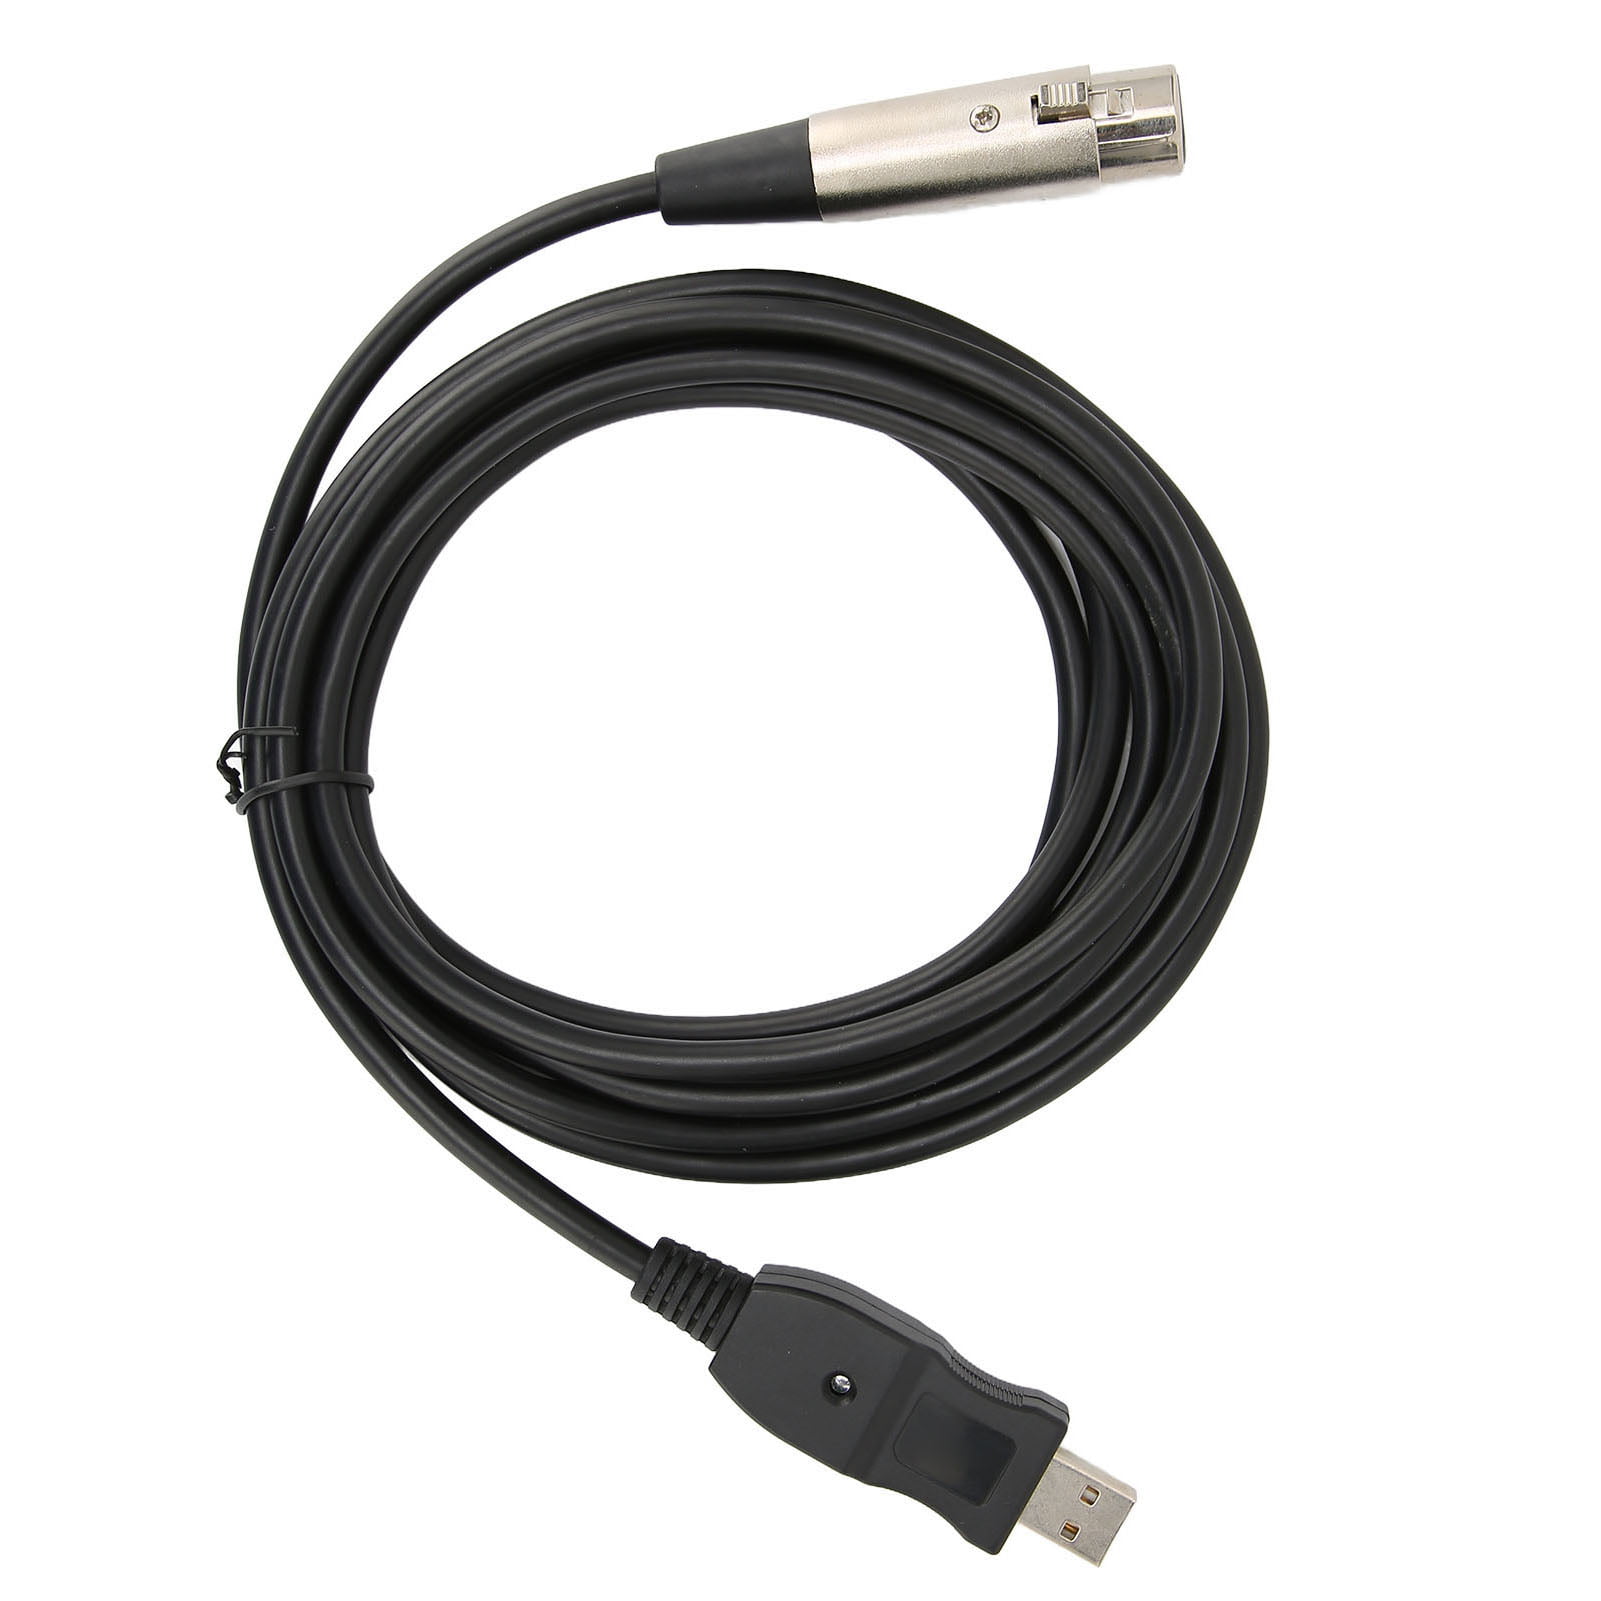 Microphone Converter Cable, USB To XLR Adapter Wire For Microphones Guitars For Devices With - Walmart.com